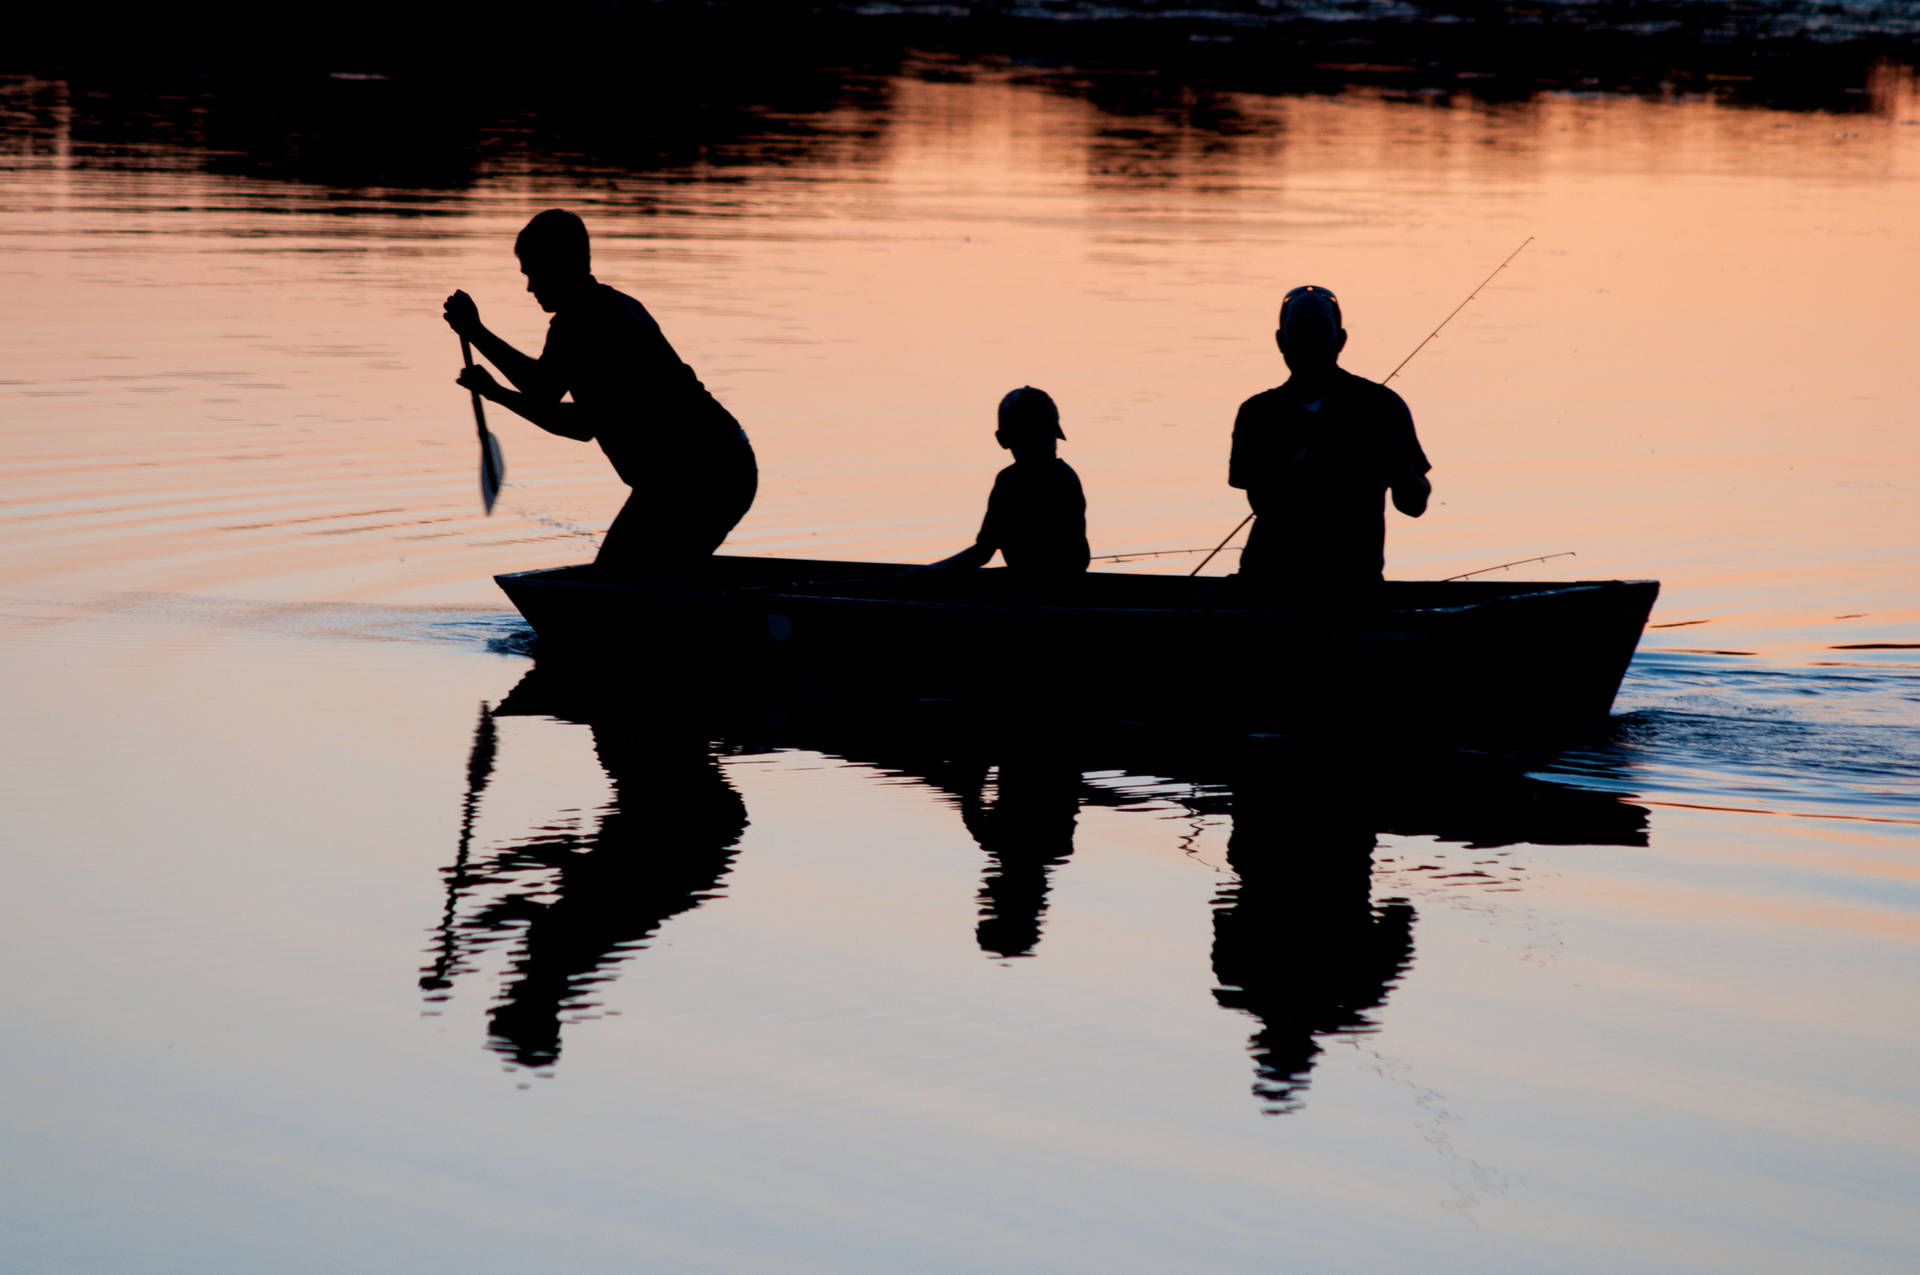 Fishing 3678X2443 Wallpaper and Background Image